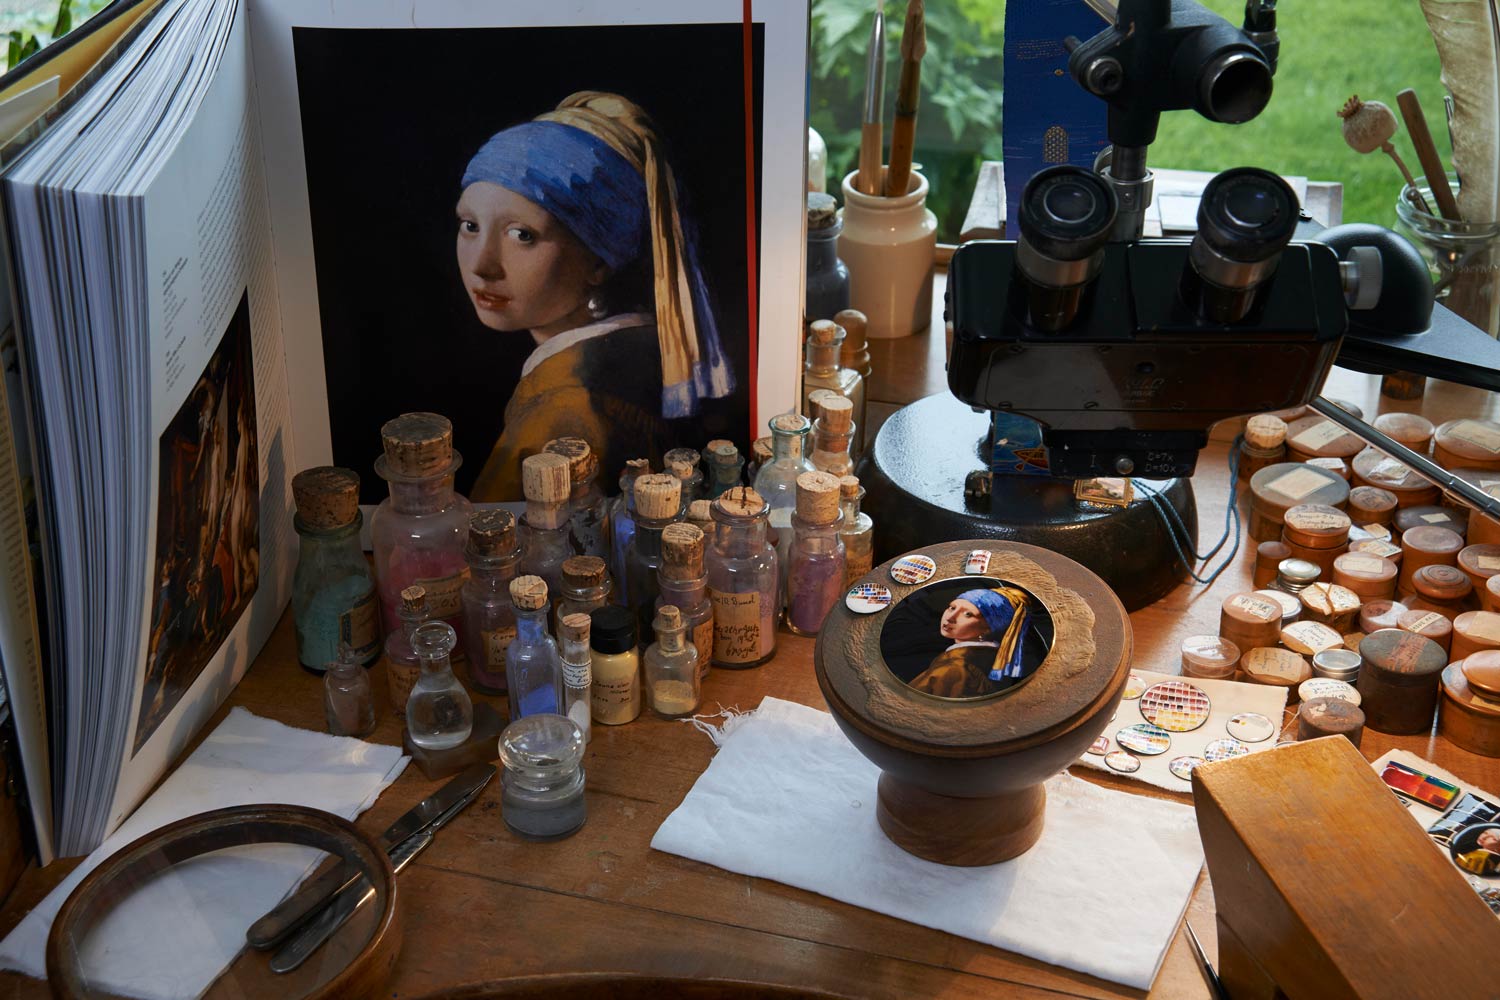 Recreating Johannes Vermeer’s ‘Girl with a Pearl Earring’ on the 98mm caseback of the Les Cabinotiers Westminster Sonnerie was quite challenging.